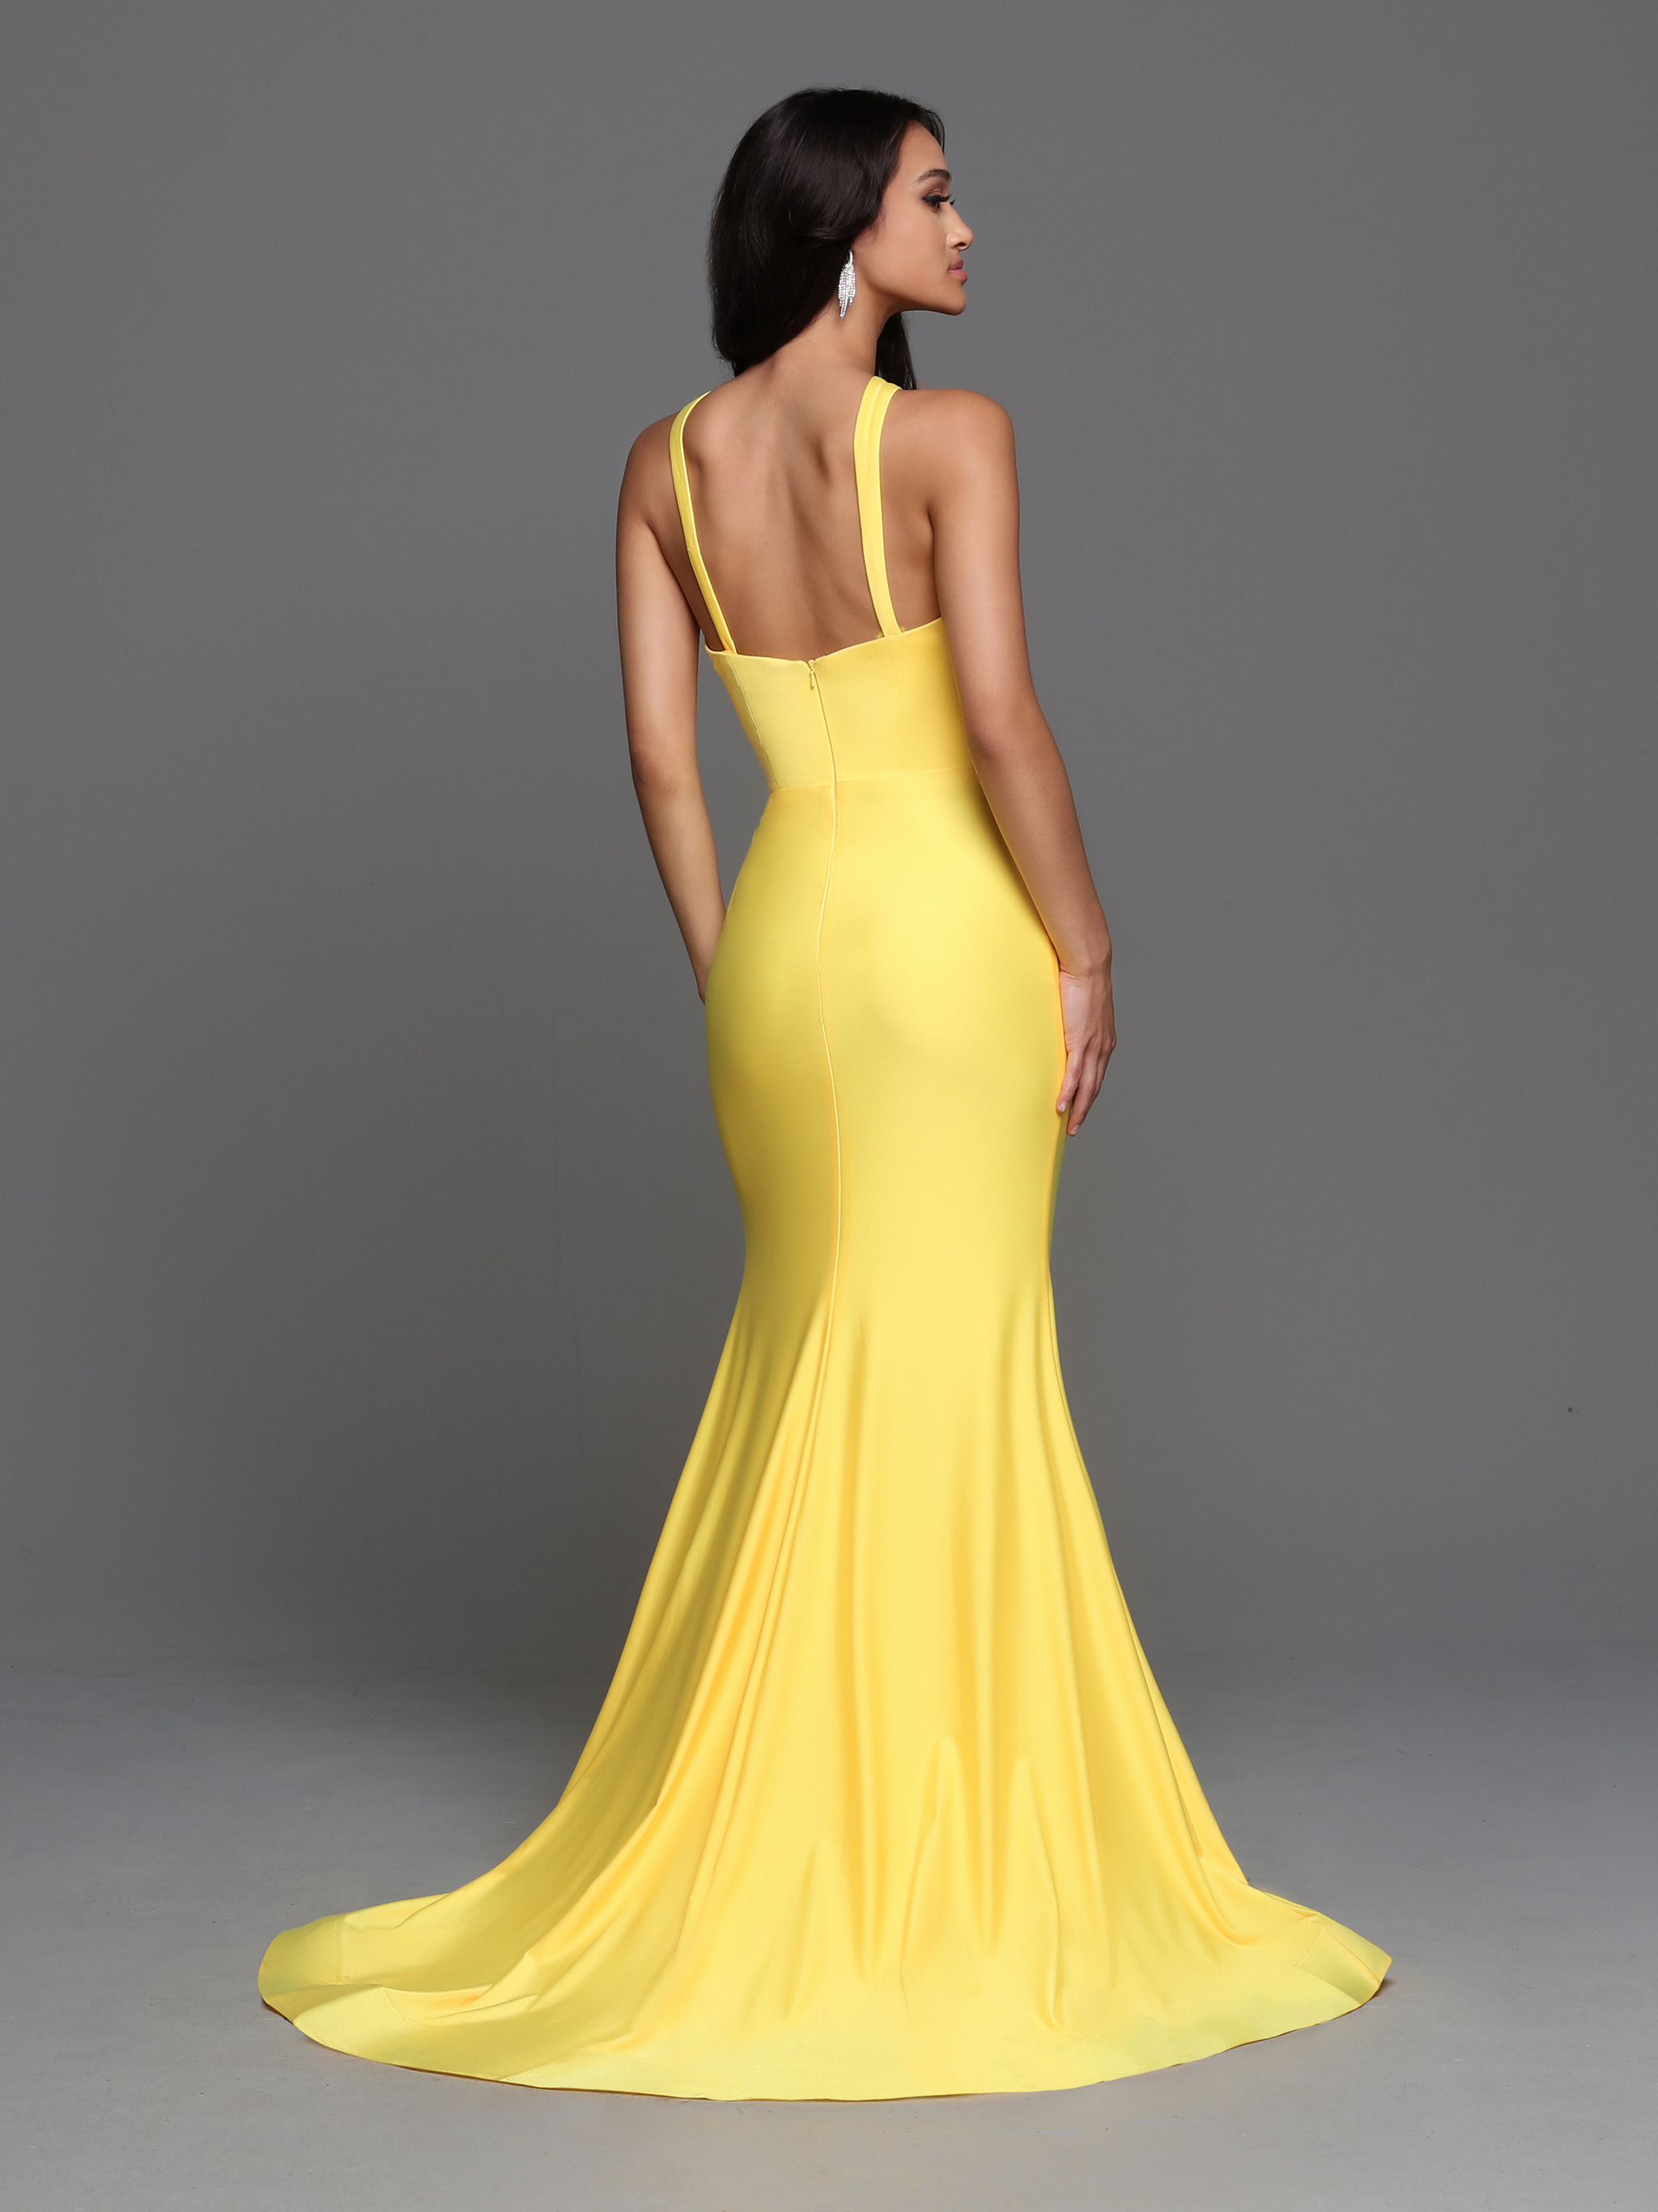 Image showing back view of style #72270